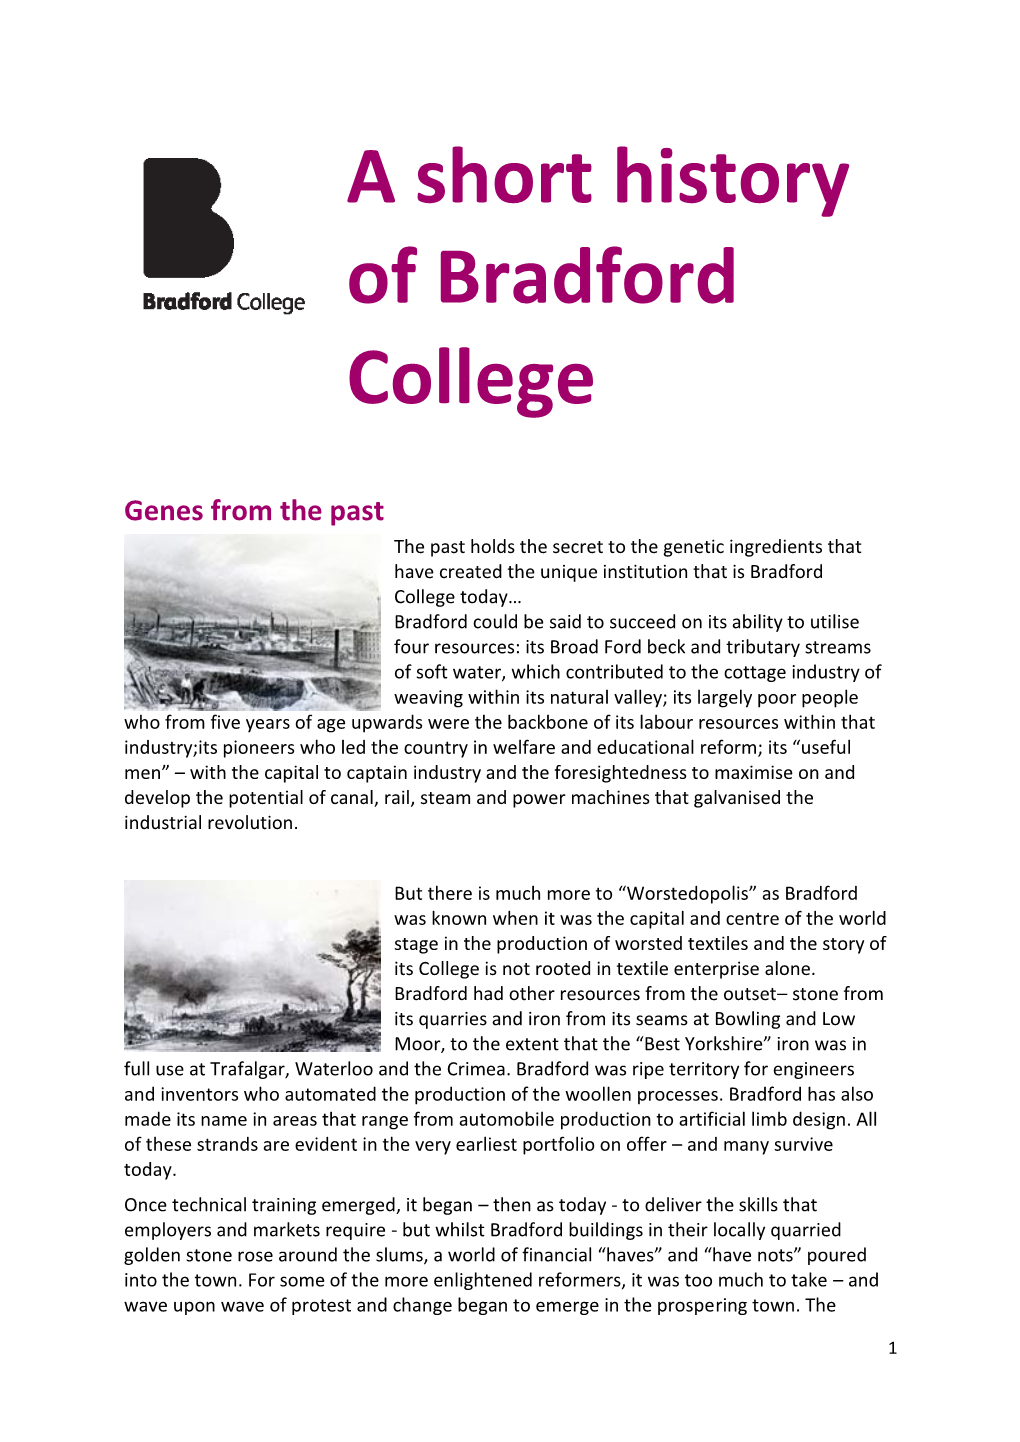 A Short History of Bradford College